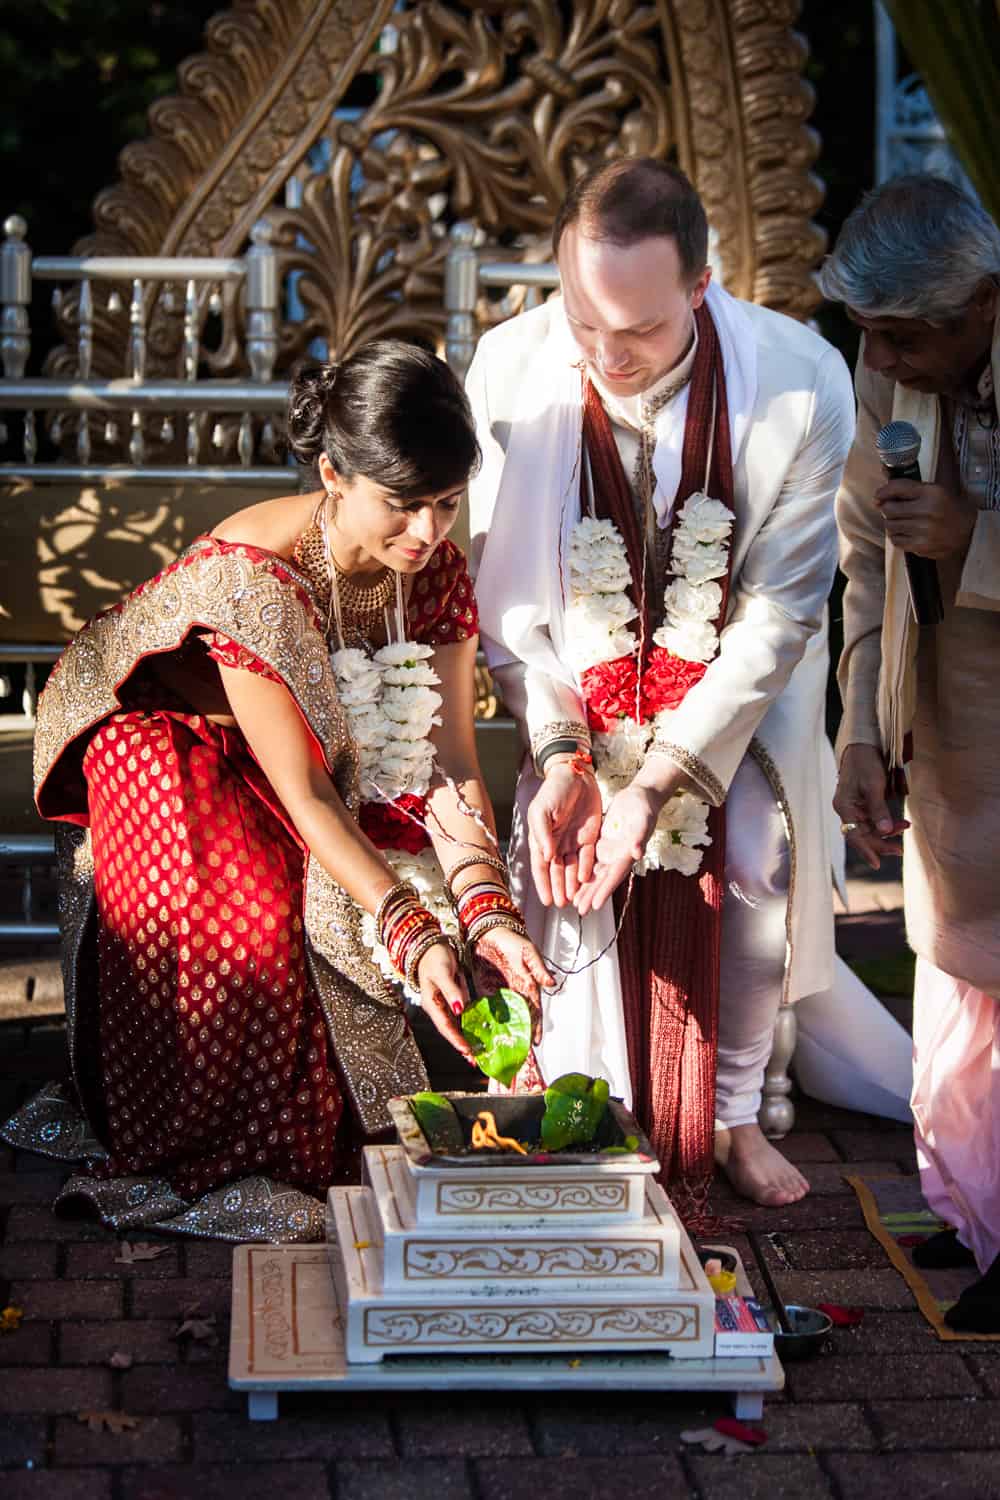 Bride and groom putting leaves in fire during traditional Hindu wedding ceremony